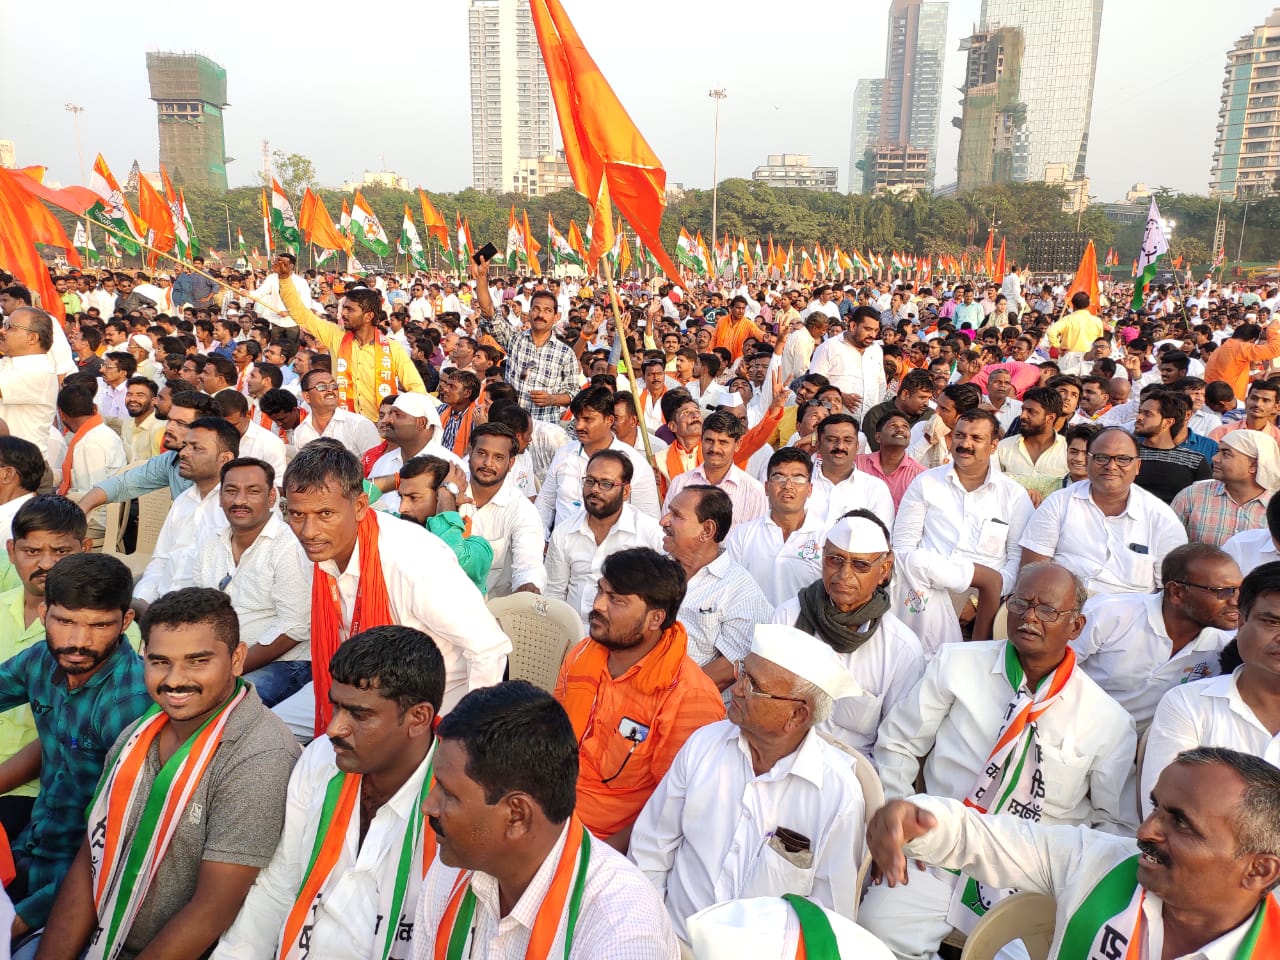 Crowd and Gathering at Shivaji Park today during the Oath Taking Swearing-In ceremony by Shiv Sena chief Uddhav Thackeray in Mumbai Today 28th November, Thursday 2019 - Photo By Sachin Murdeshwar GPN